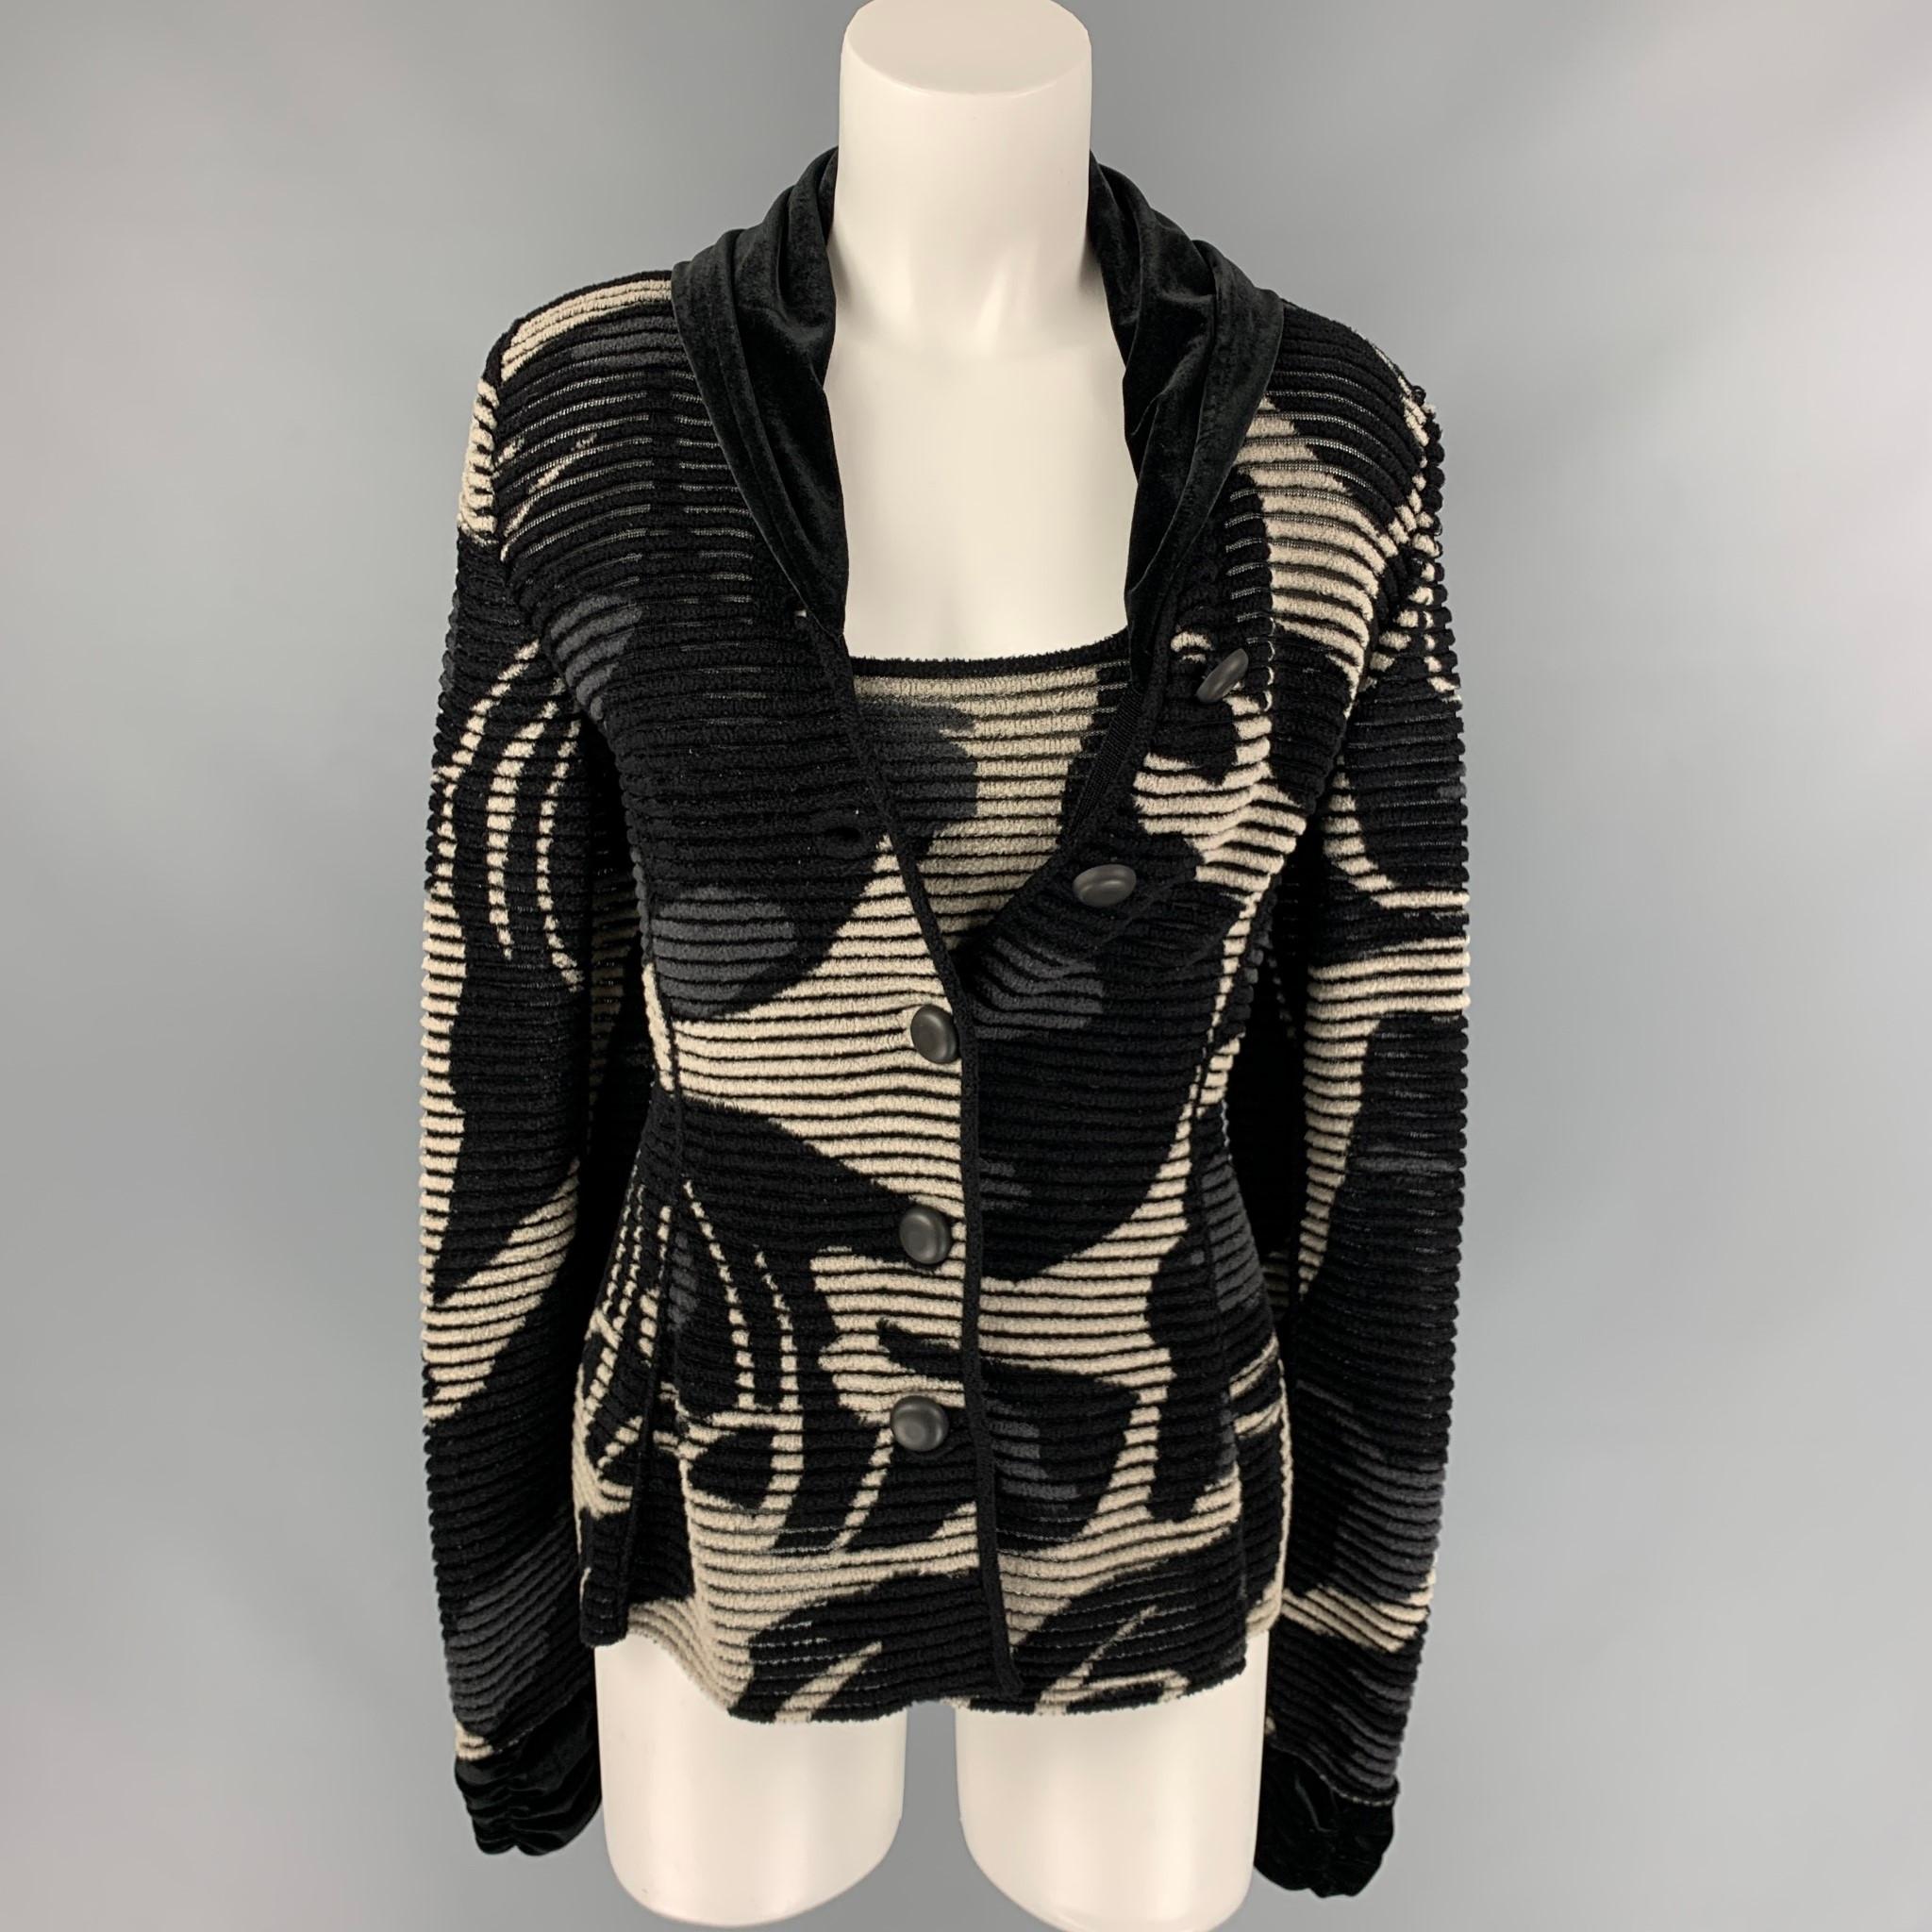 GIORGIO ARMANI 2 Piece cardigan set comes in a black & grey knitted viscose / polyamide featuring a velvet trim, buttoned closure, and a matching camisole. Made in Italy. 

Very Good Pre-Owned Condition.
Marked: